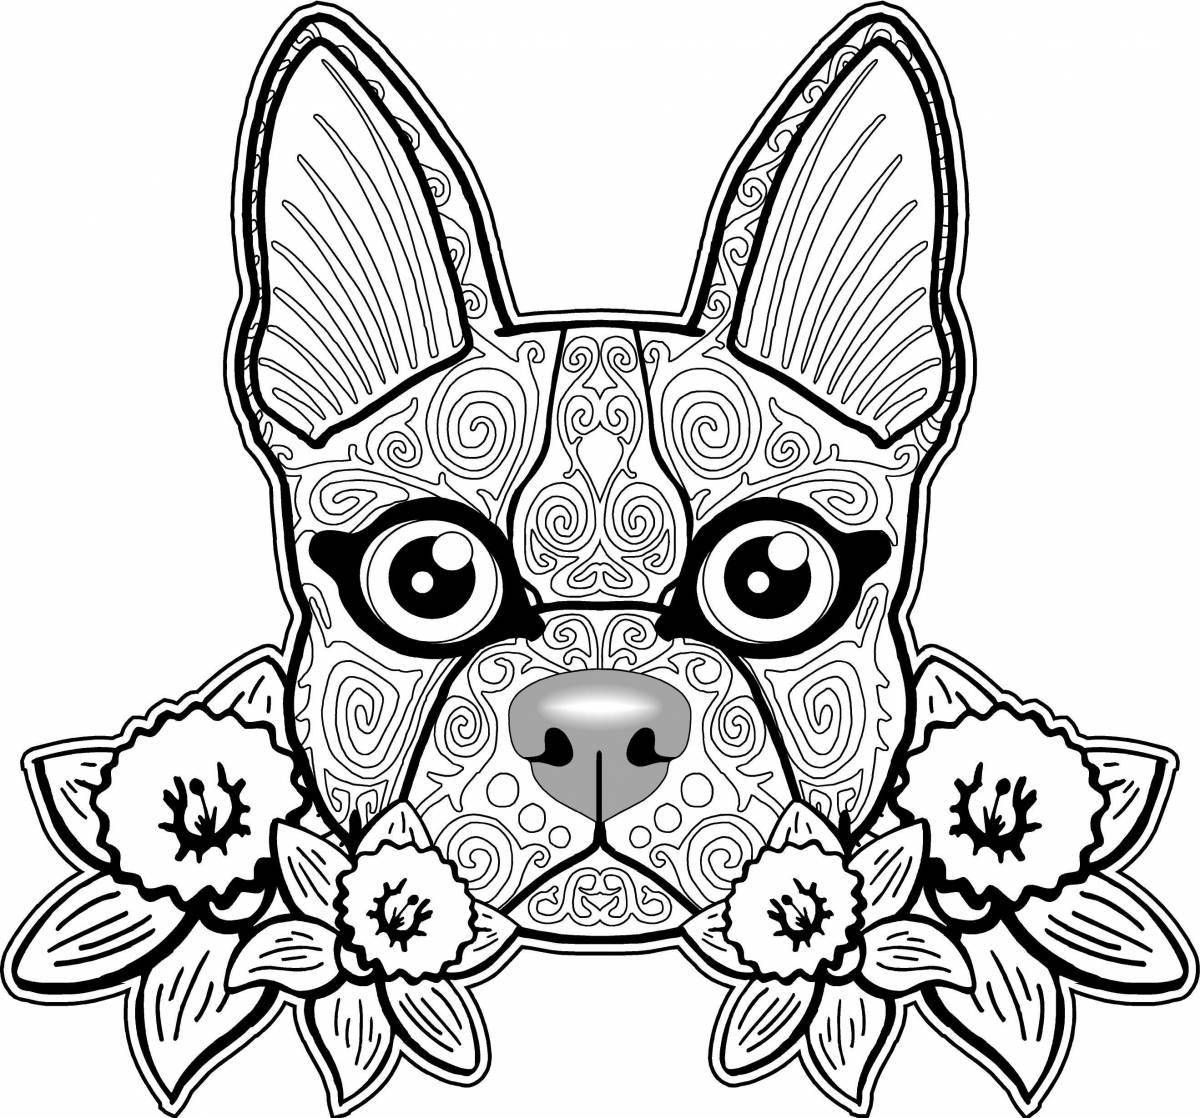 Funny coloring pages animals cats and dogs